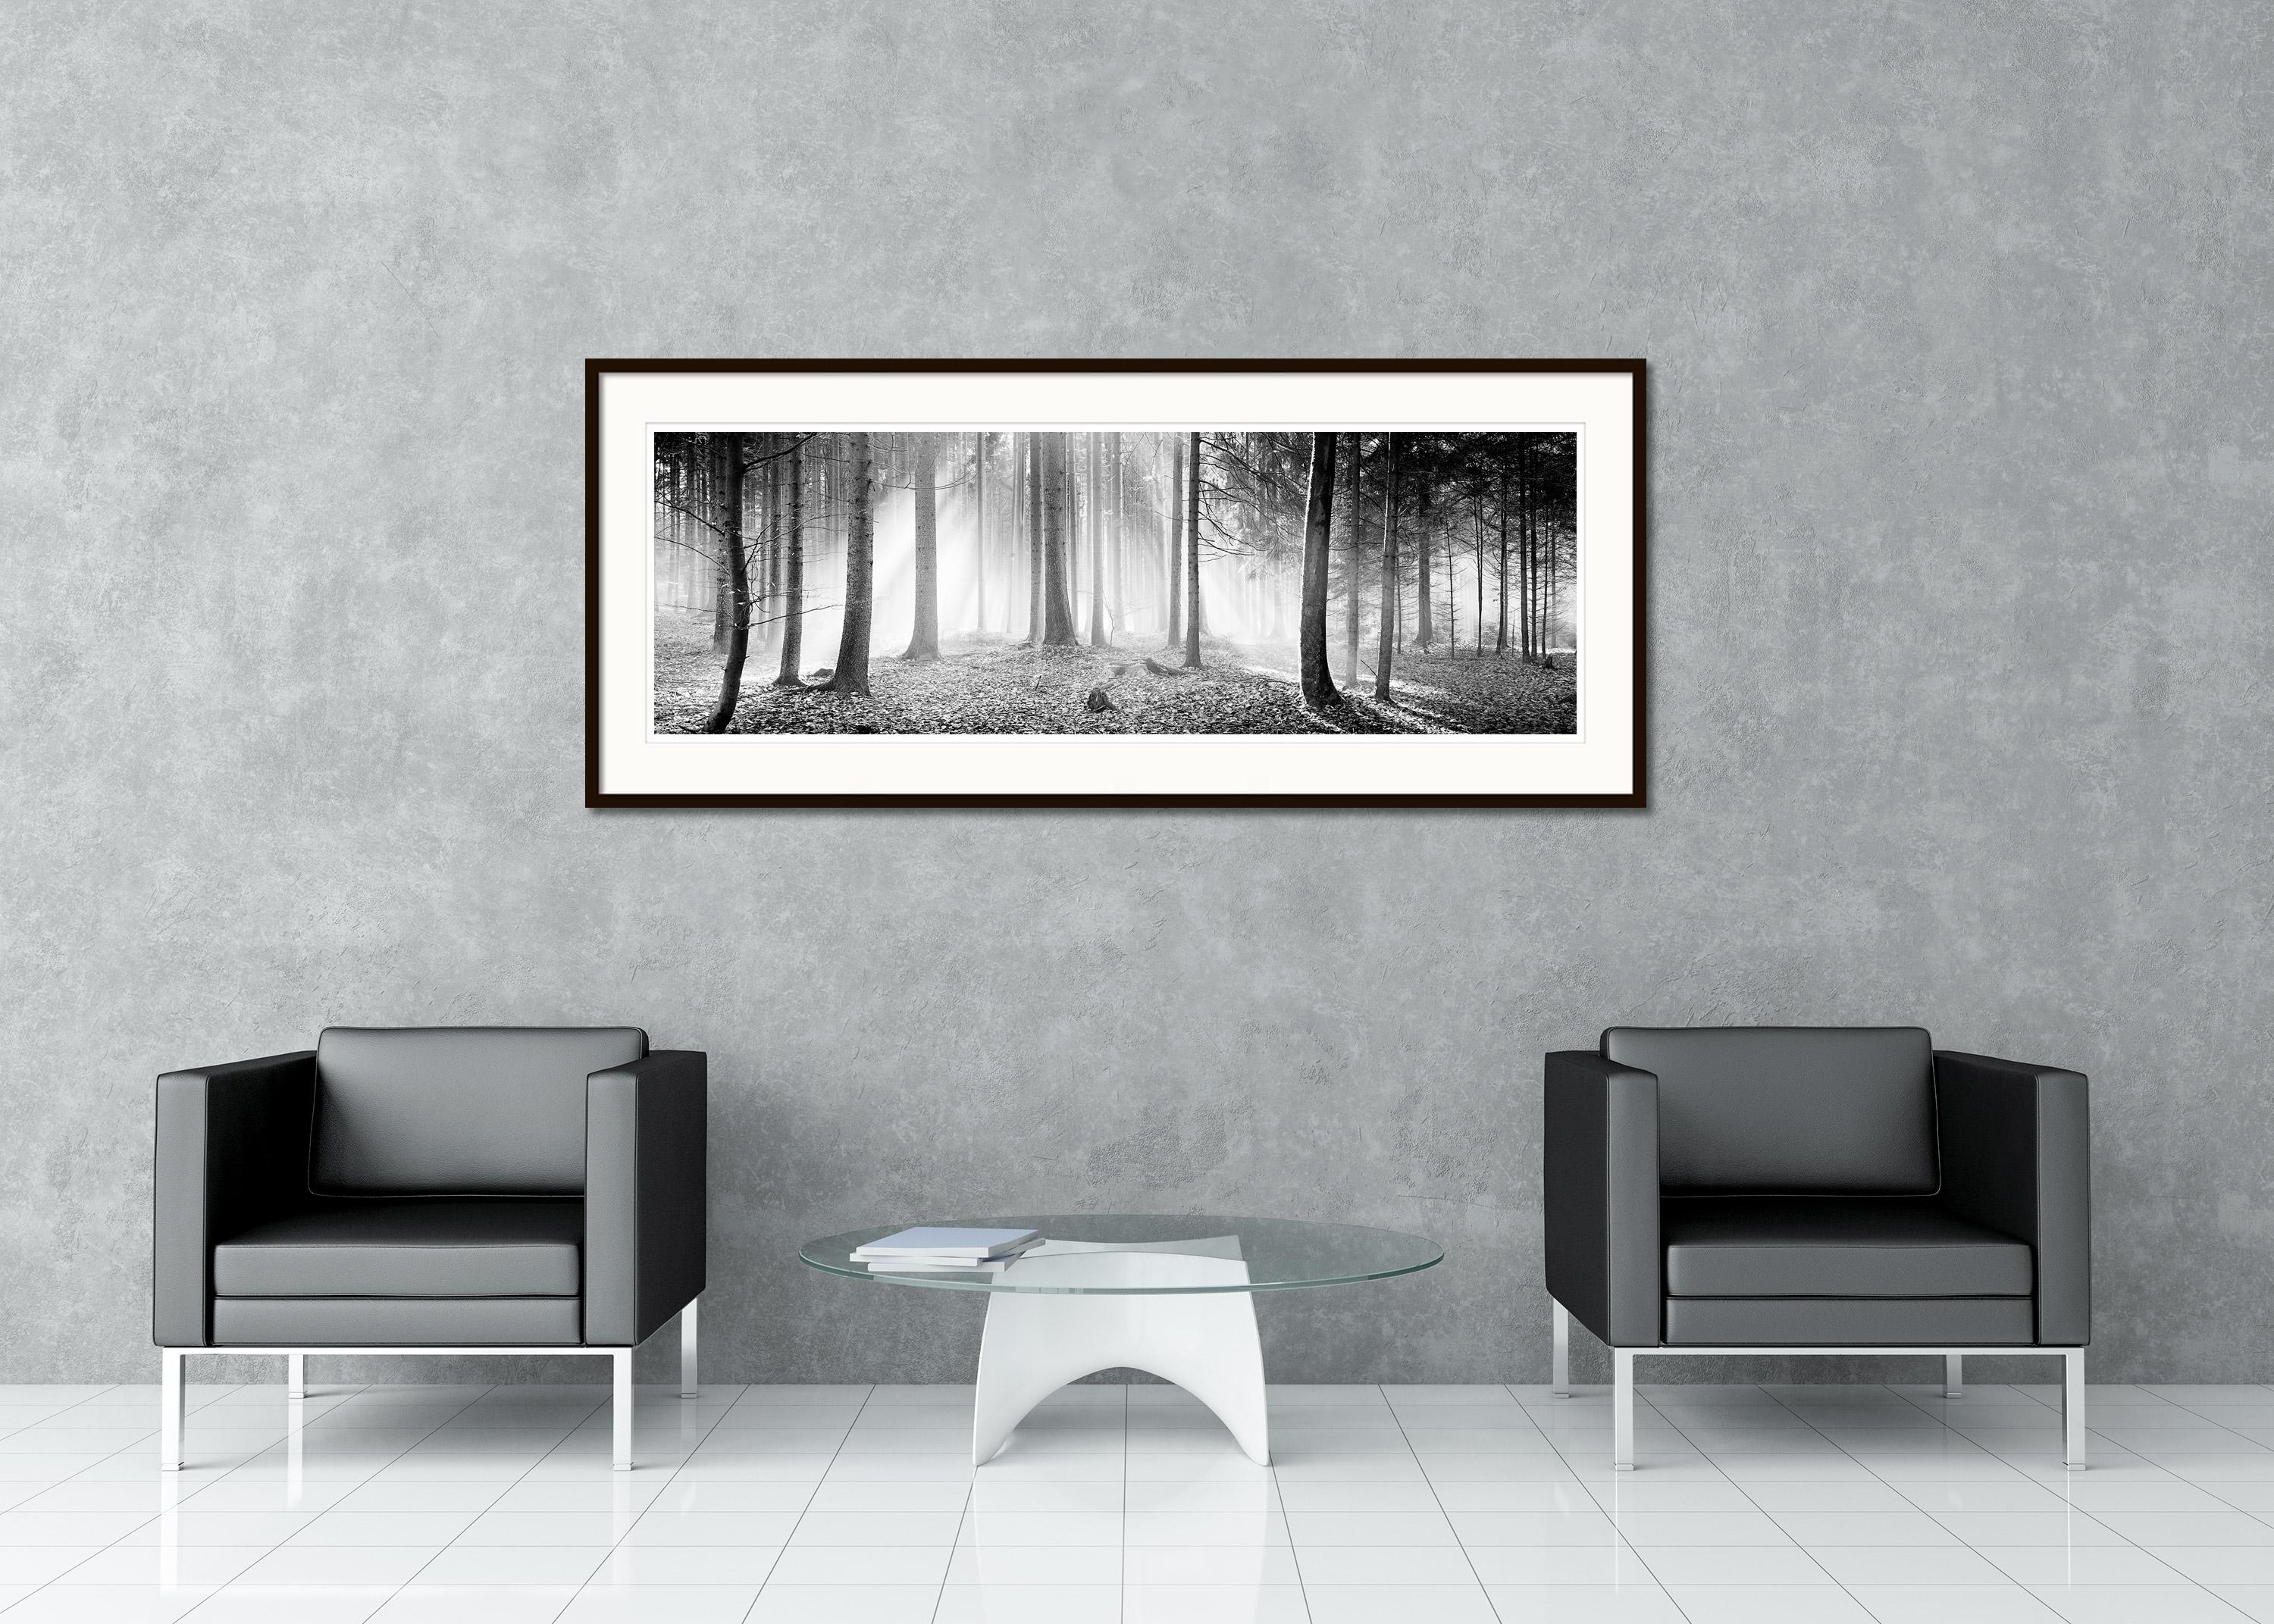 Black and white fine art panorama landscape photography. Archival pigment ink print, limited edition of 15. All Gerald Berghammer prints are made to order in limited editions on Hahnemuehle Photo Rag Baryta. Each print is stamped on the back and